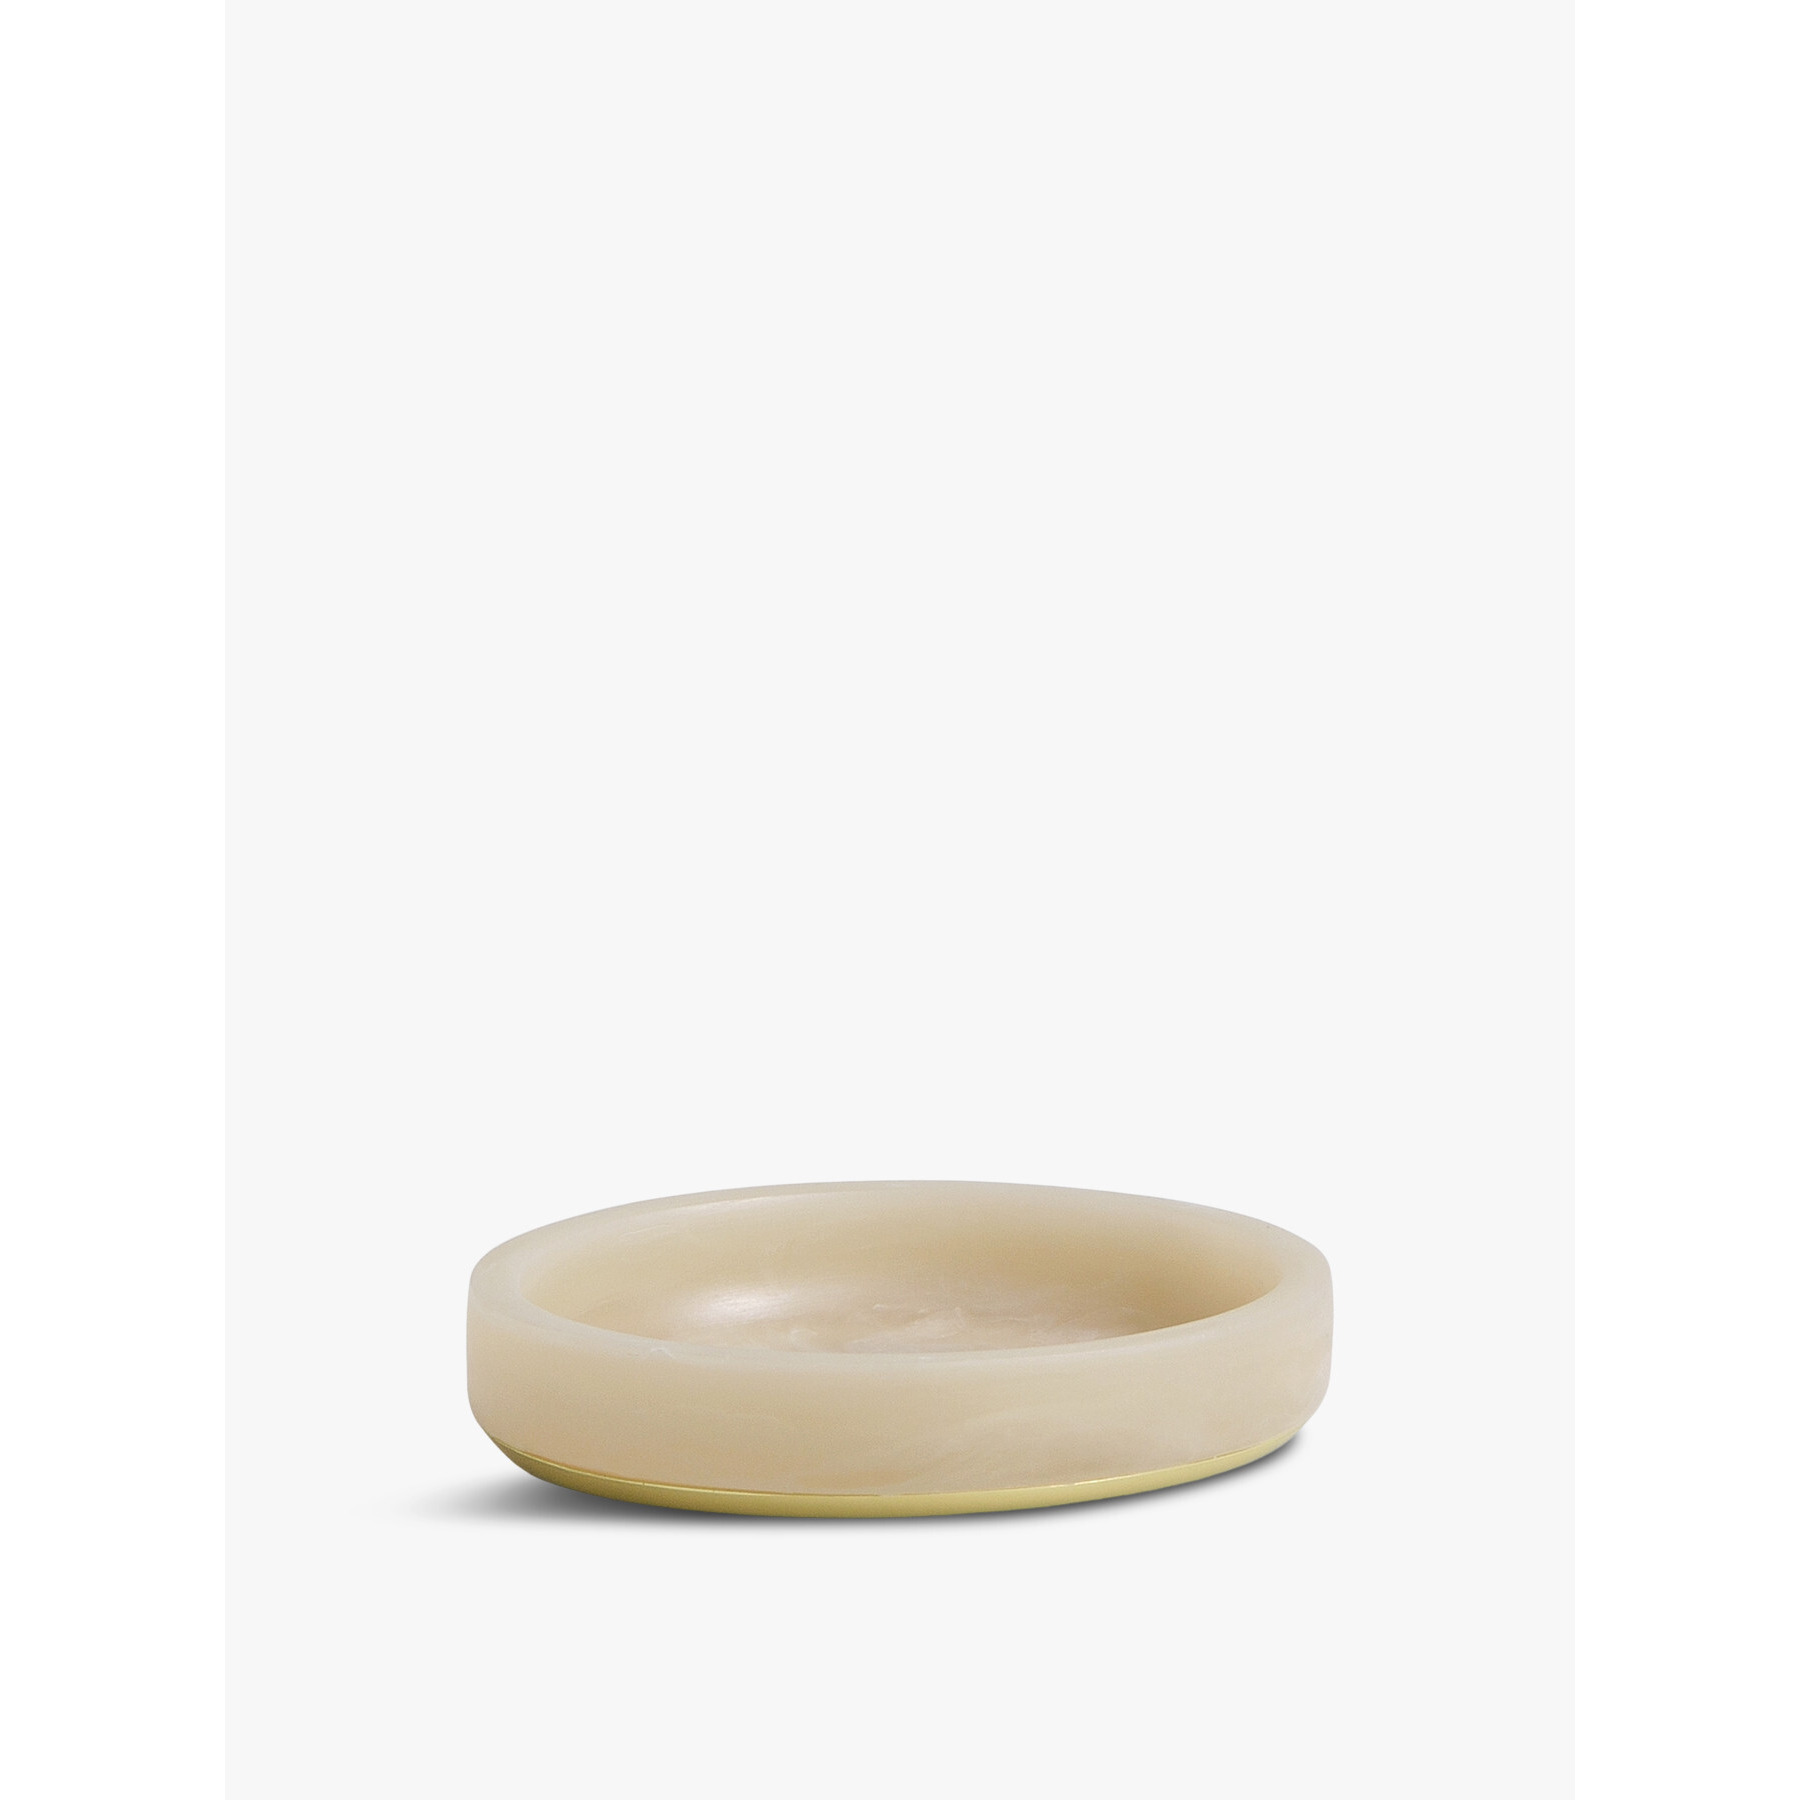 Andrea House Cloudy Gold Soap Dish - image 1